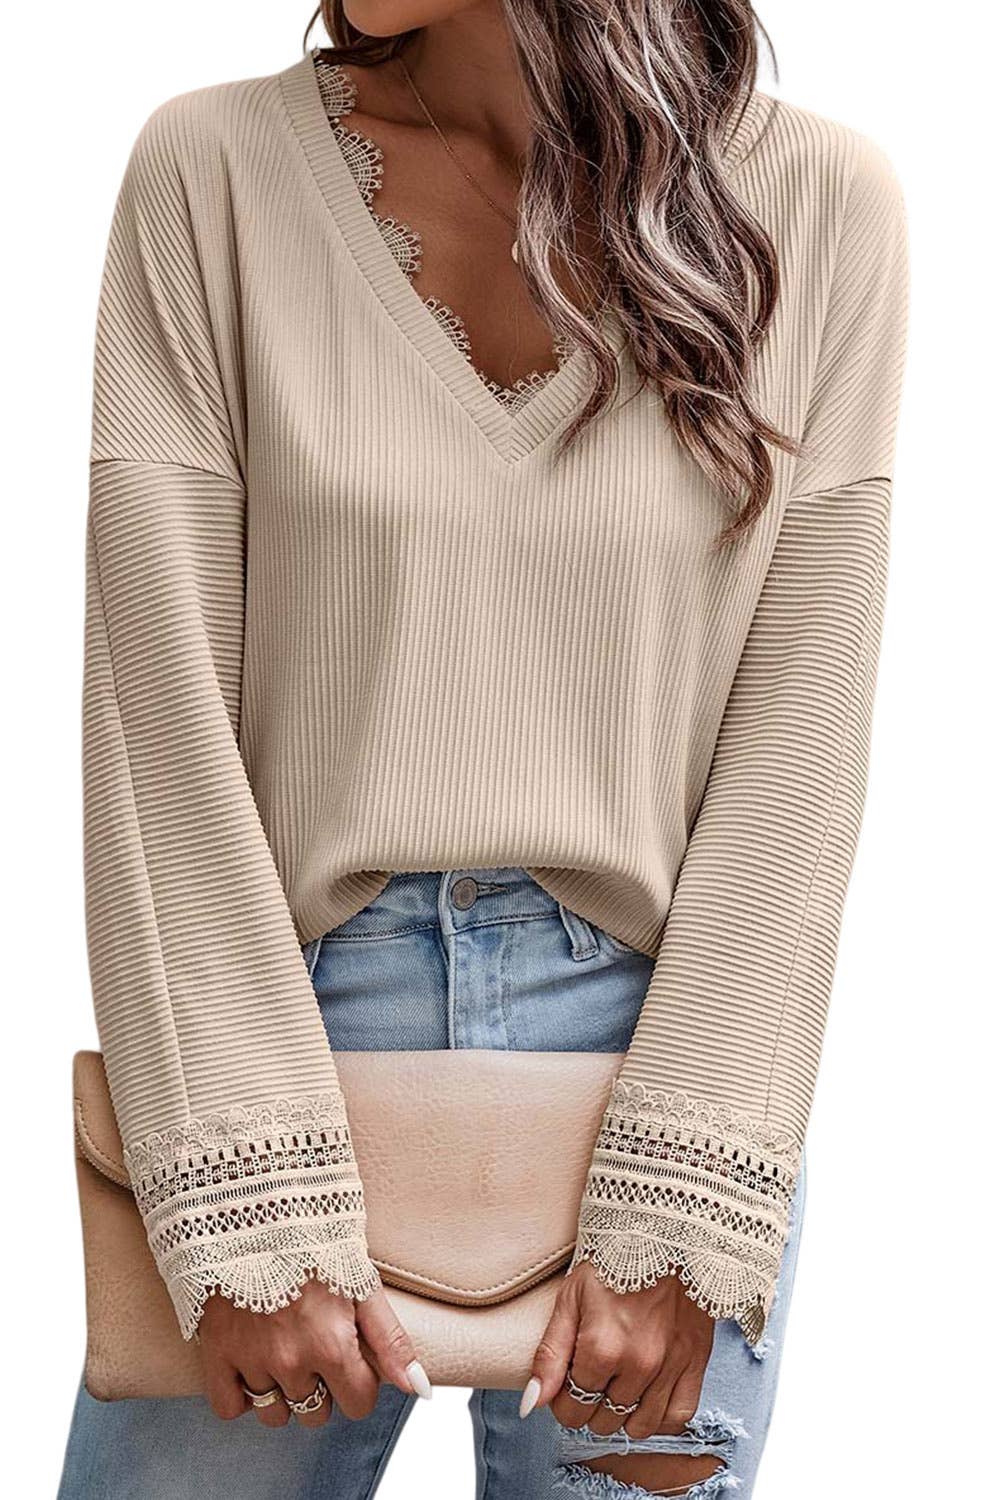 Ribbed Texture Lace Trim V Neck Long Sleeve Top: S / MULTI